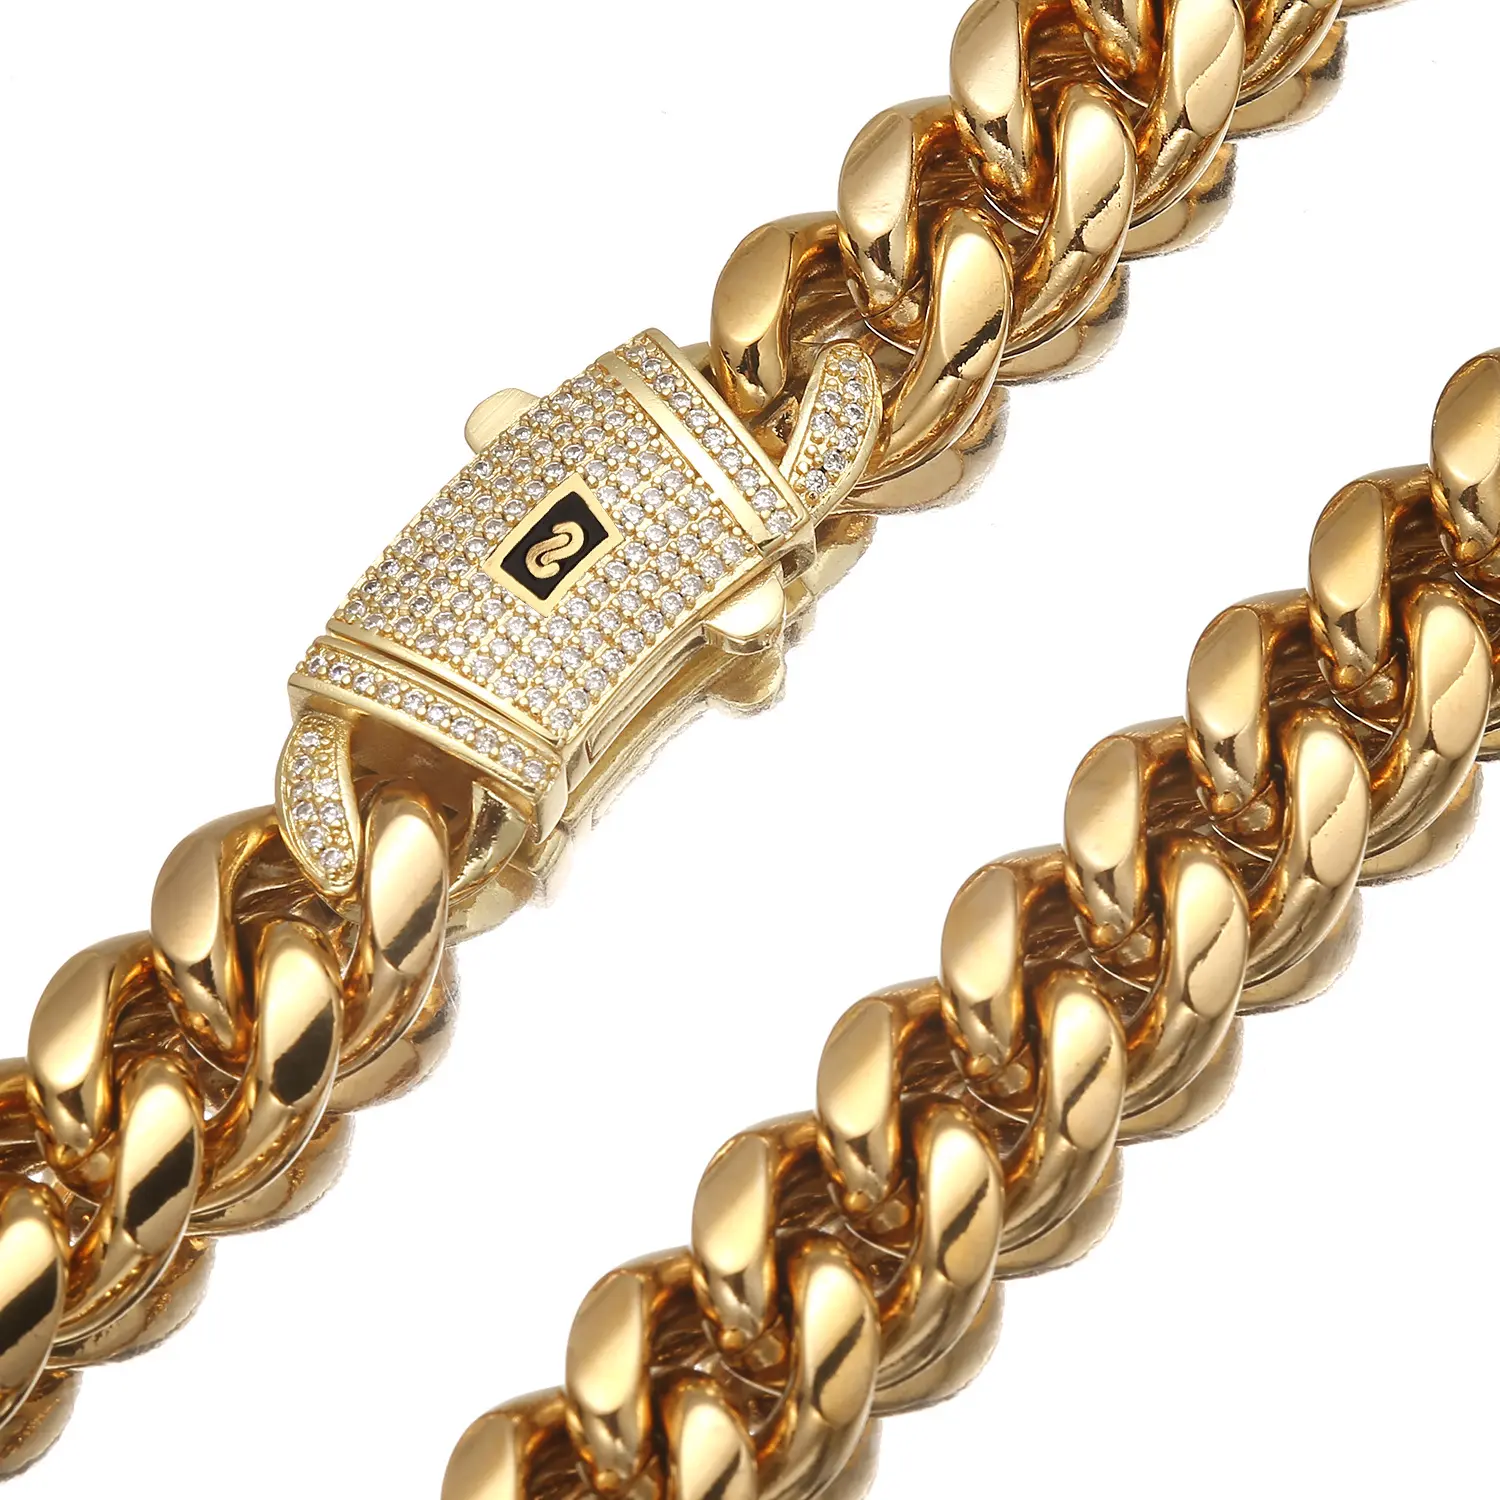 Fashion Stocks mens 18k gold plated stainless steel miami cuban link chain necklace